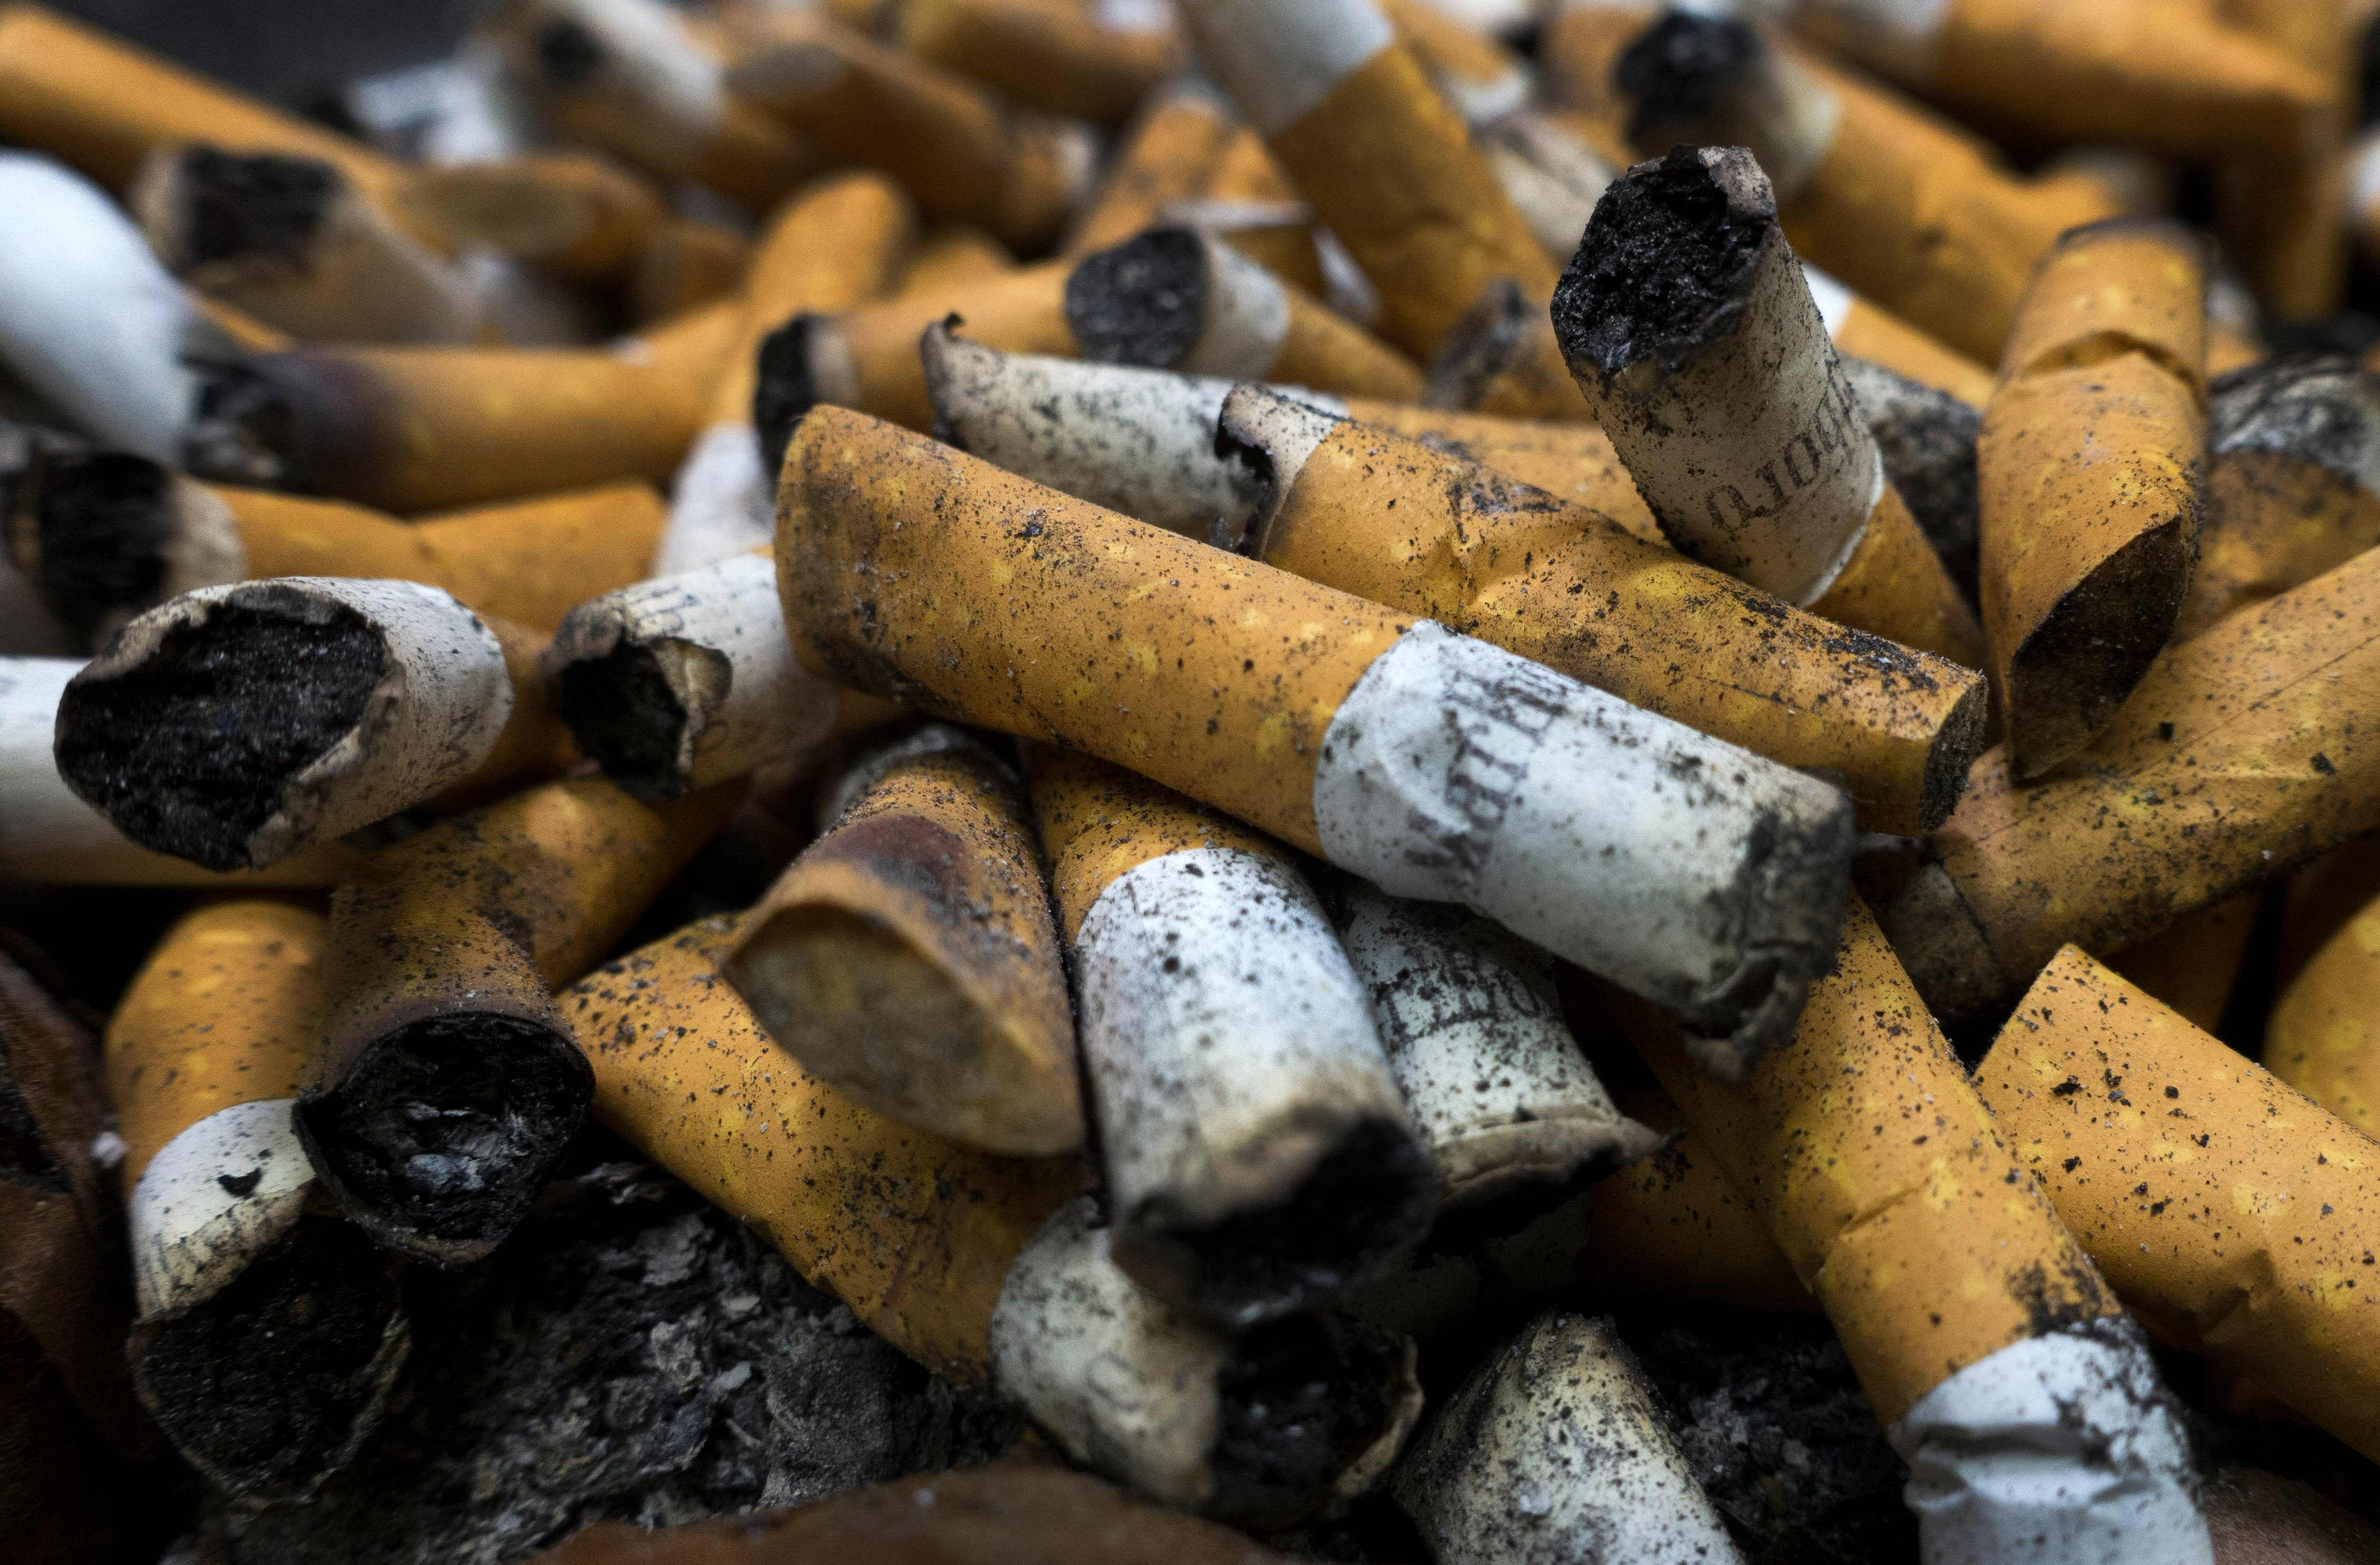 The combination of affordable cigarettes made possible by low taxes and aggressive marketing tactics from the tobacco industry could attract young people to smoking. Photo: AFP